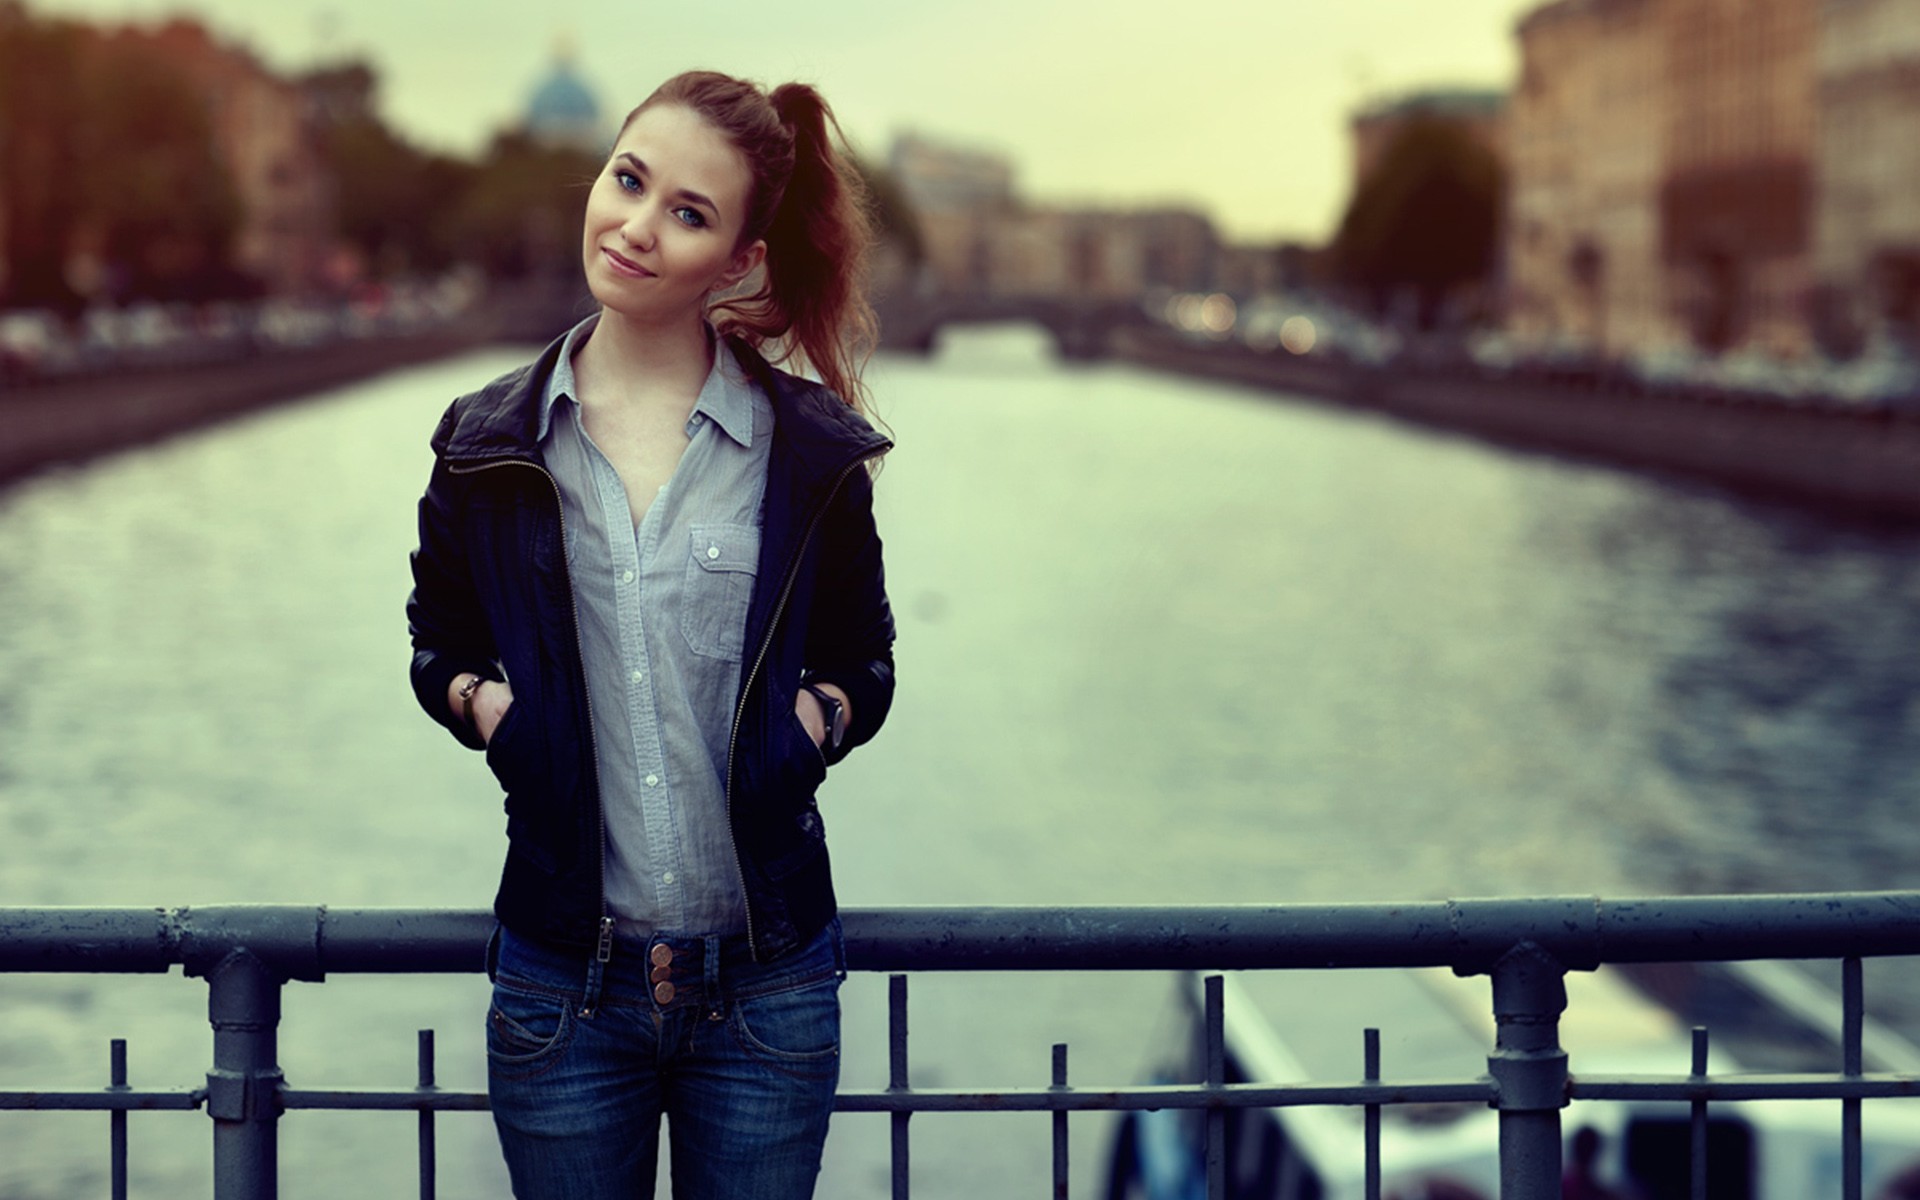 People 1920x1200 women women outdoors jeans ponytail depth of field urban smiling cityscape river model leather jacket hands in pockets blue shirt standing looking at viewer